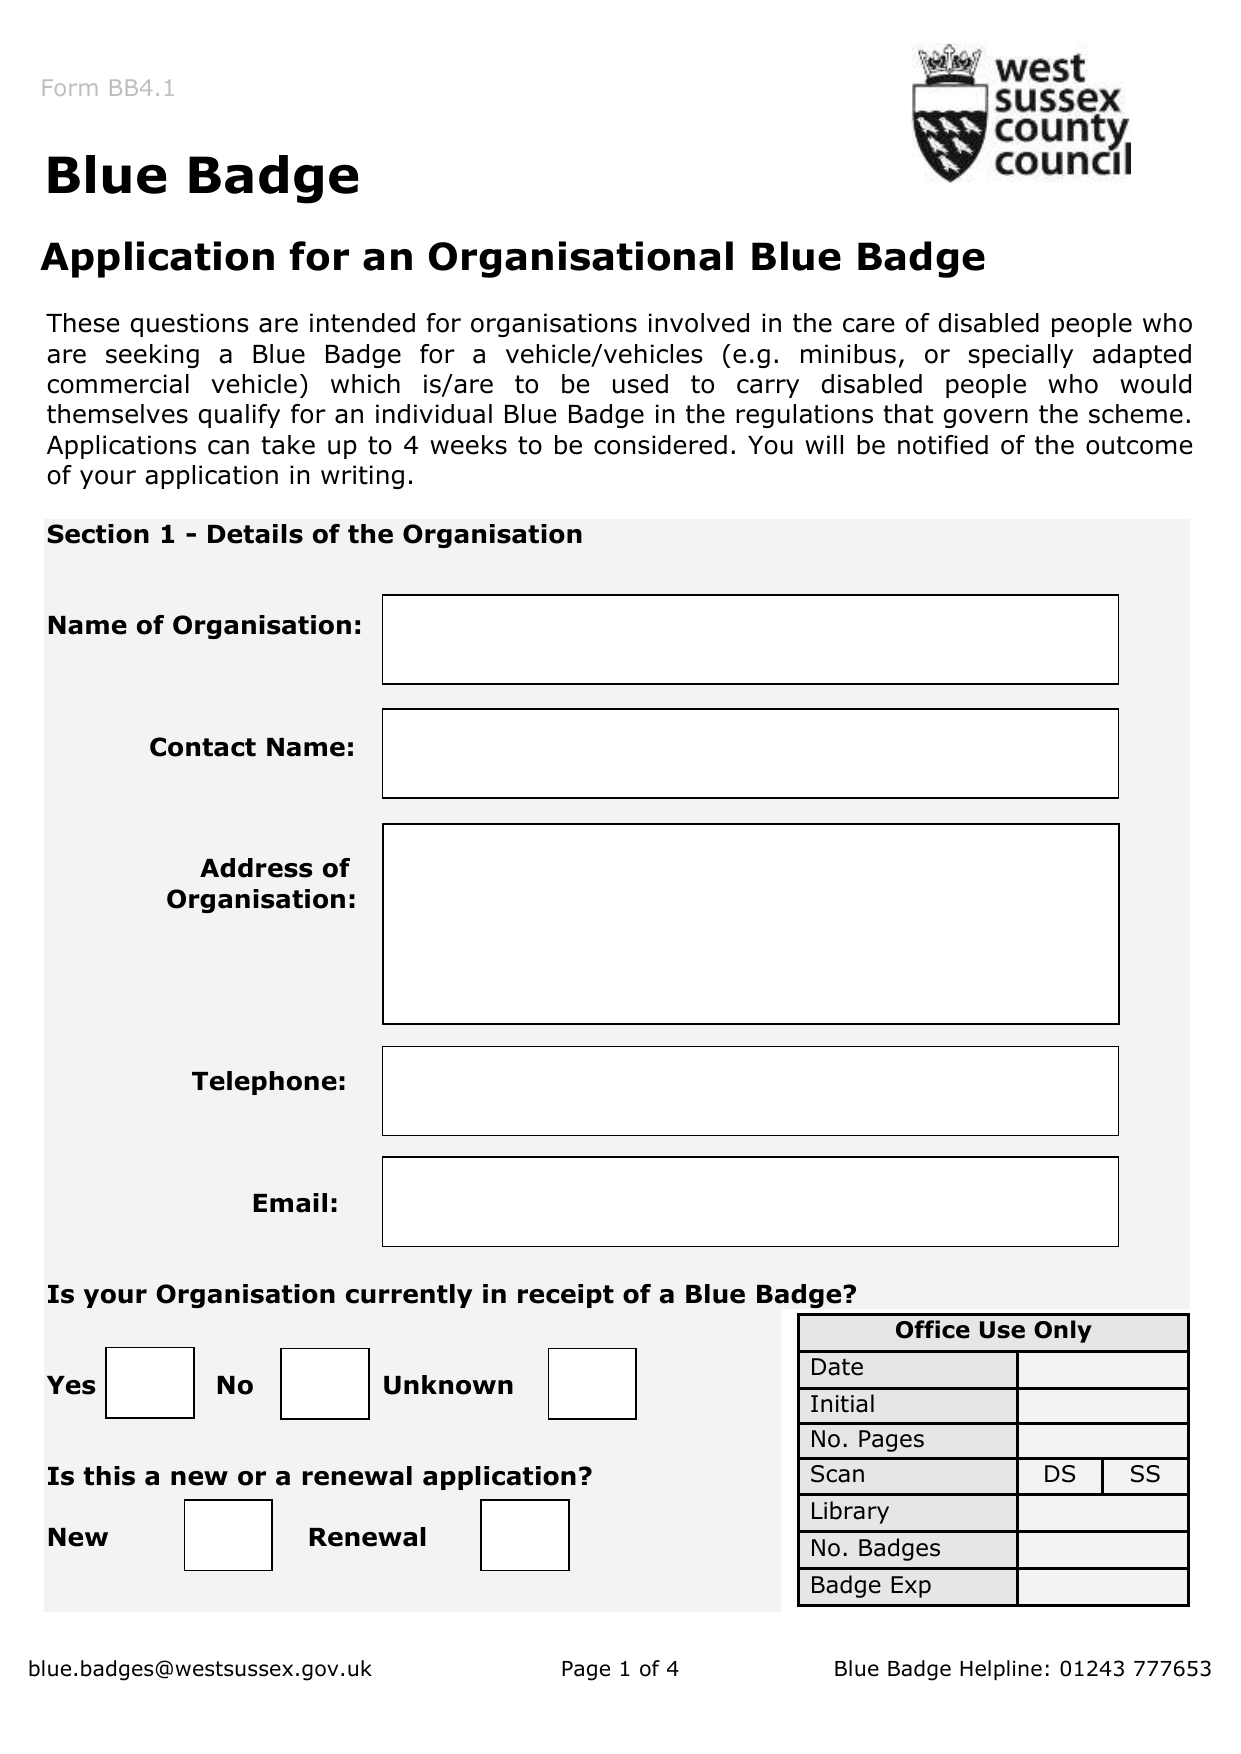 Blue Badge Application Form West Sussex County Council